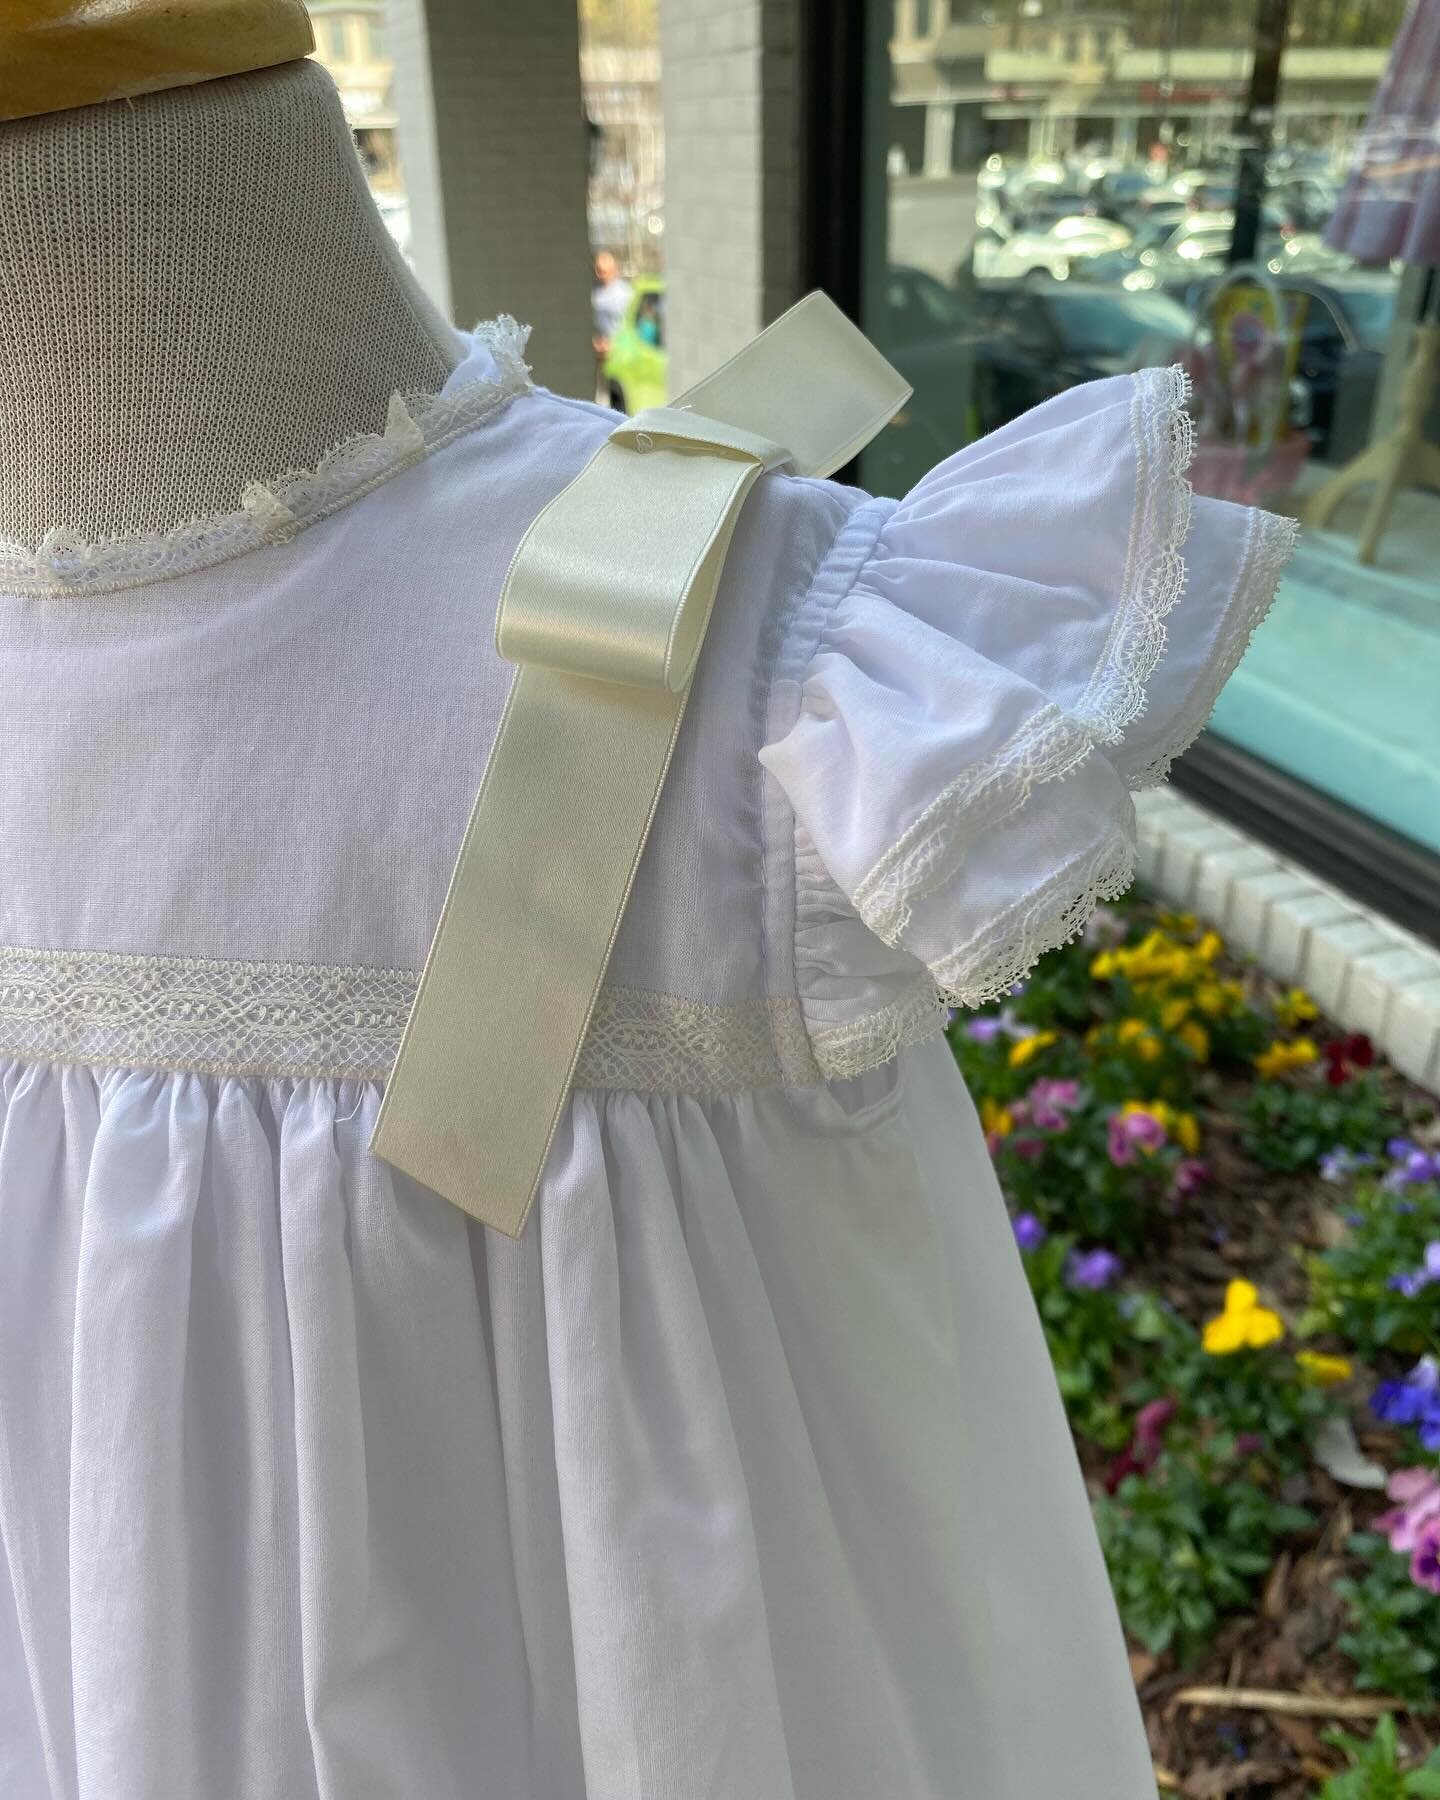 Beautiful heirloom looks for Easter..🕊️
(also perfect for Christenings and weddings)
.
.
#childrensshop #childrensshopatl #heirloom #remembernguyen #shoplocal #shopsmall